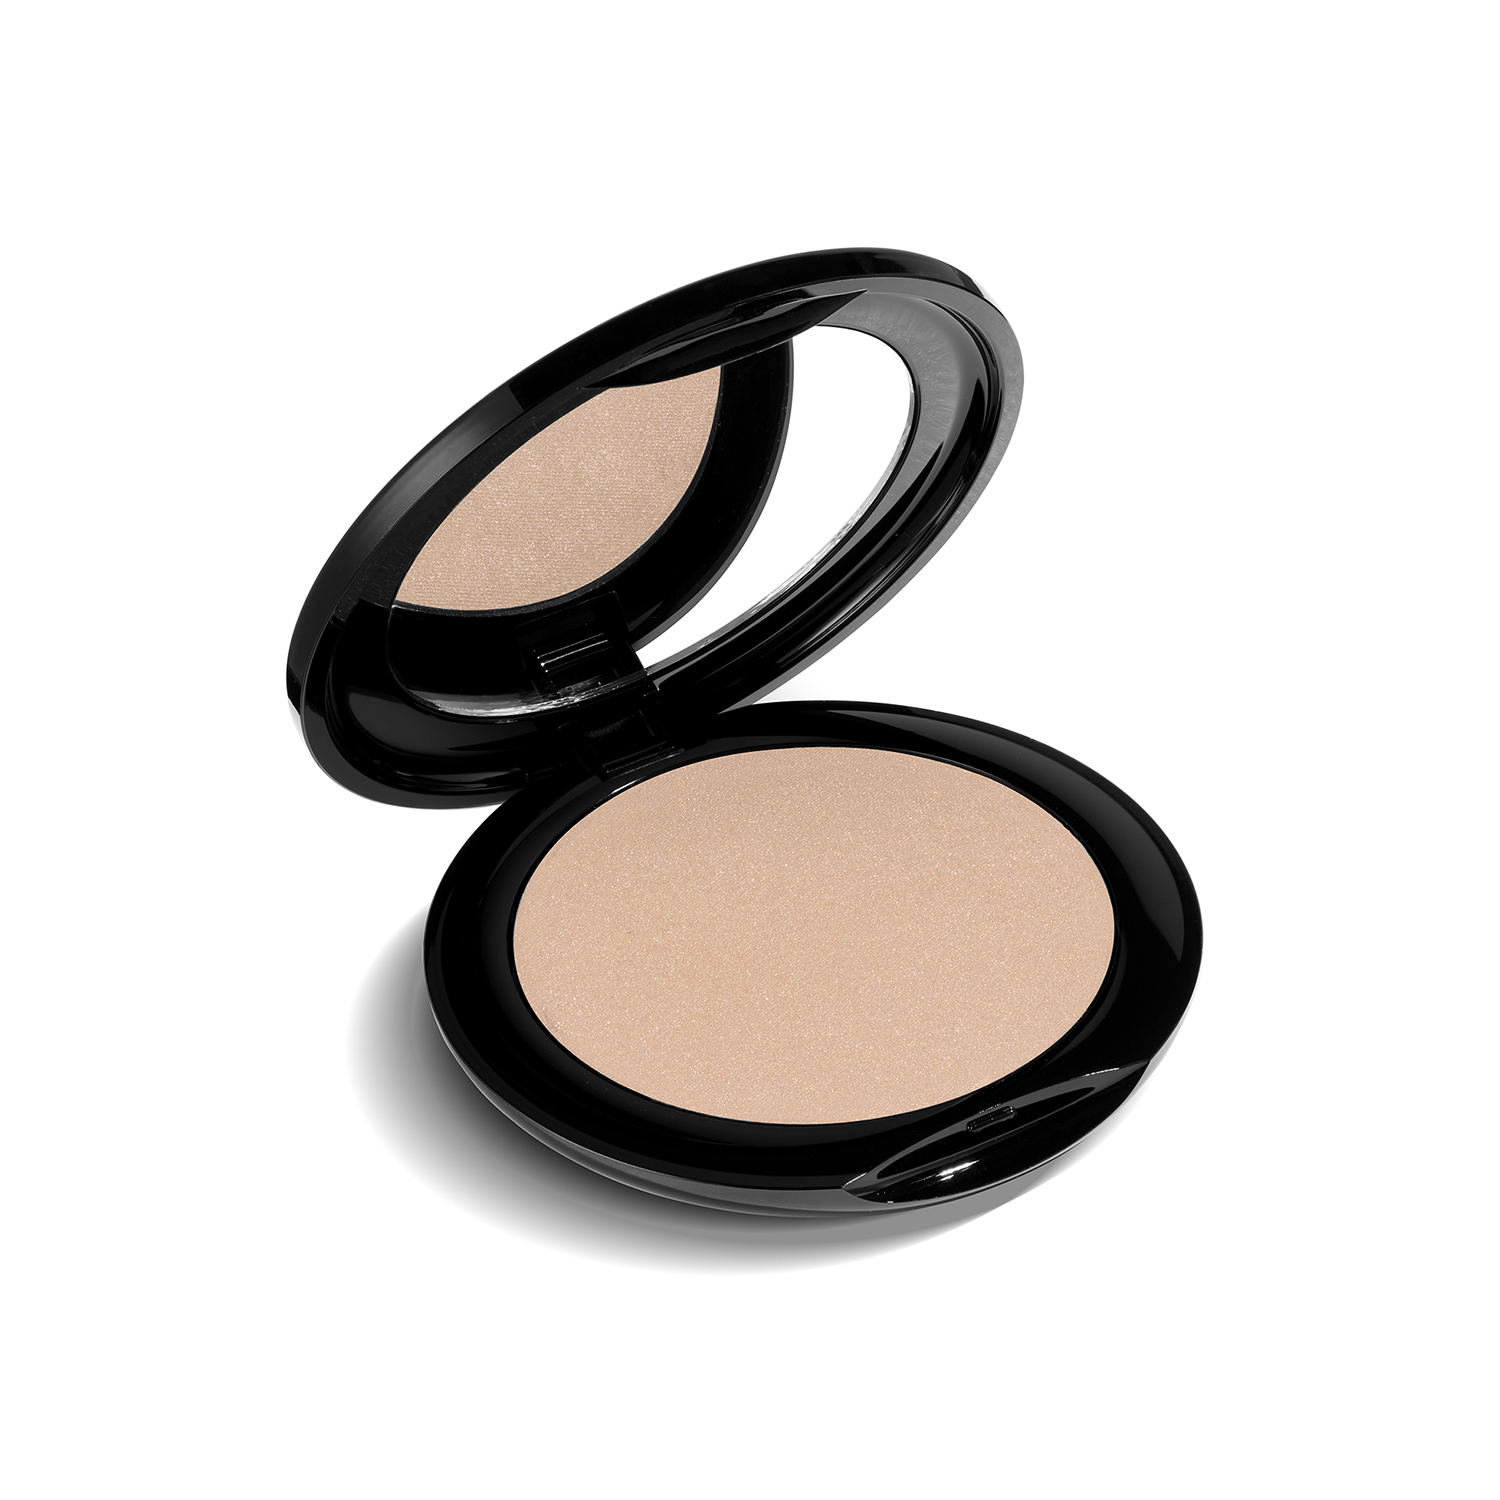 PERFECT FINISH COMPACT FACE POWDER (01 Porcelain)